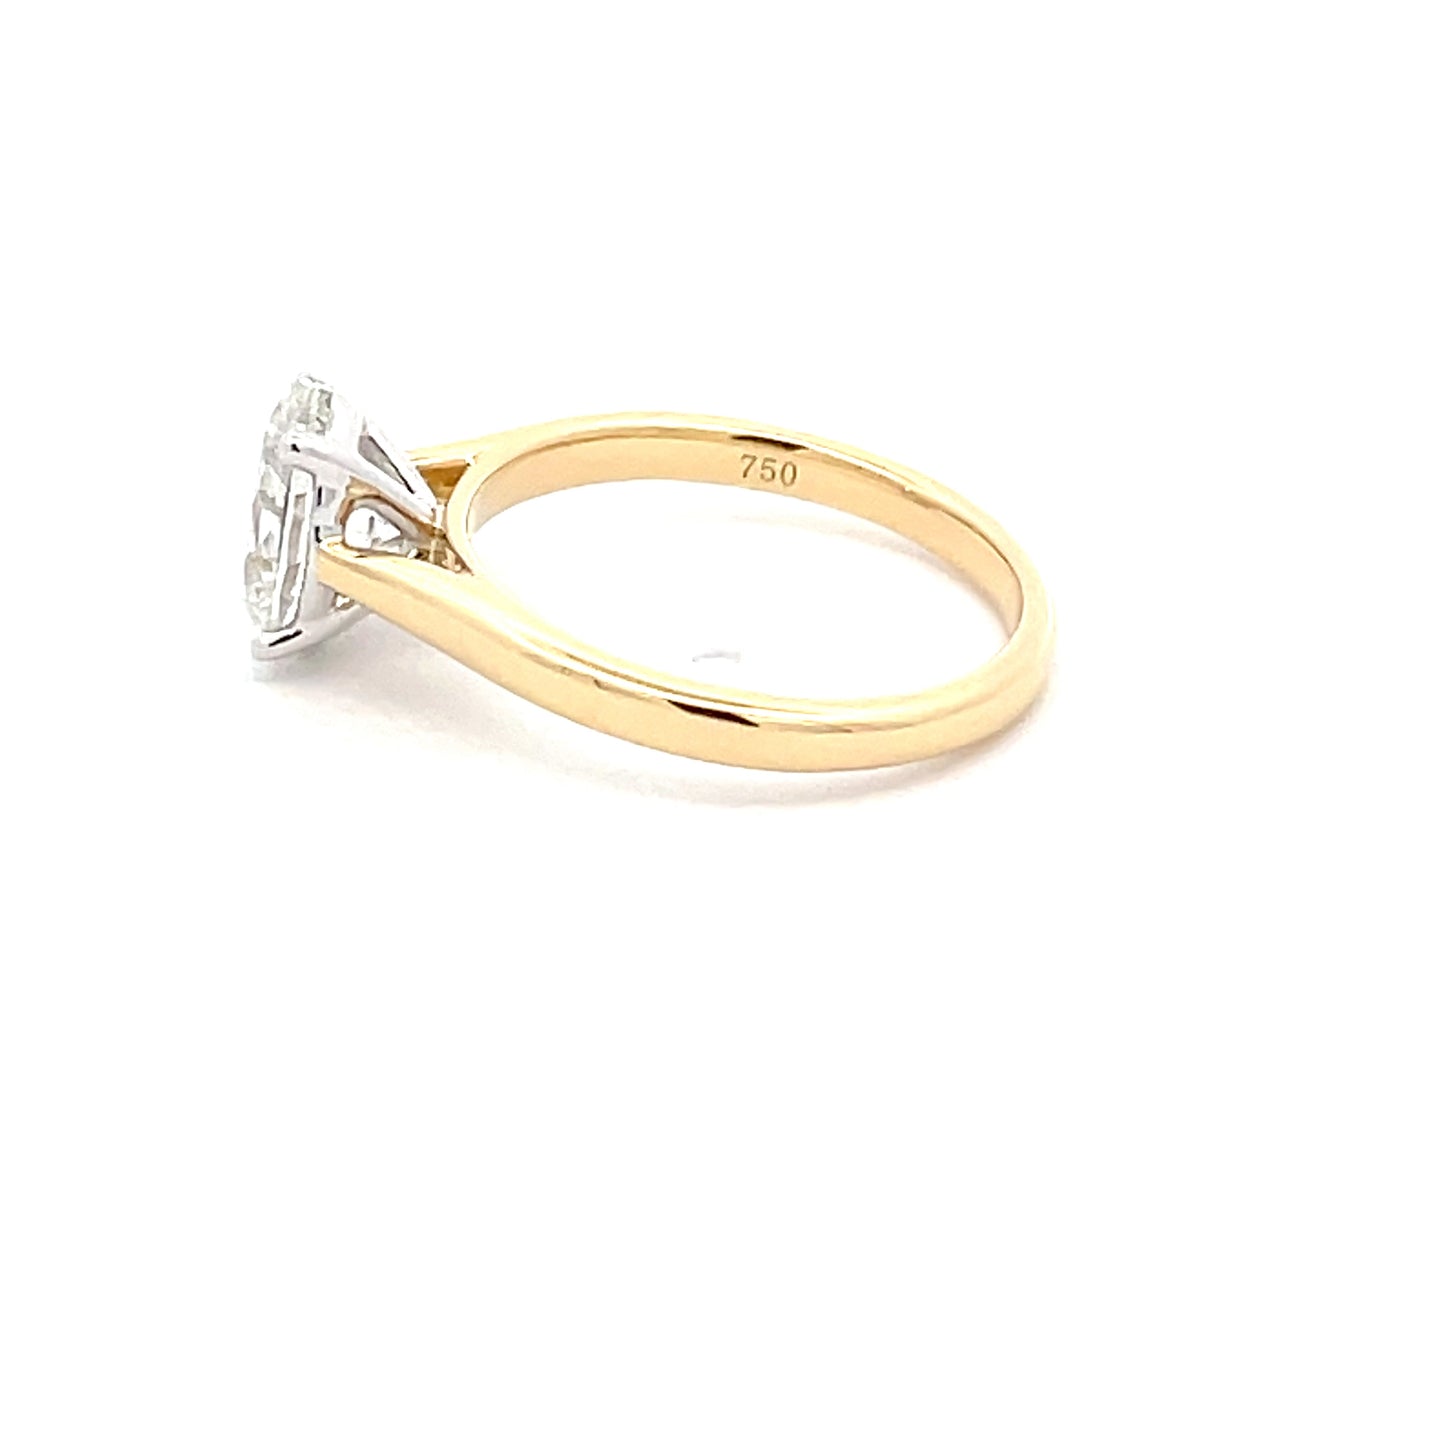 Oval Shaped Diamond Solitaire Ring - 1.50cts  Gardiner Brothers   